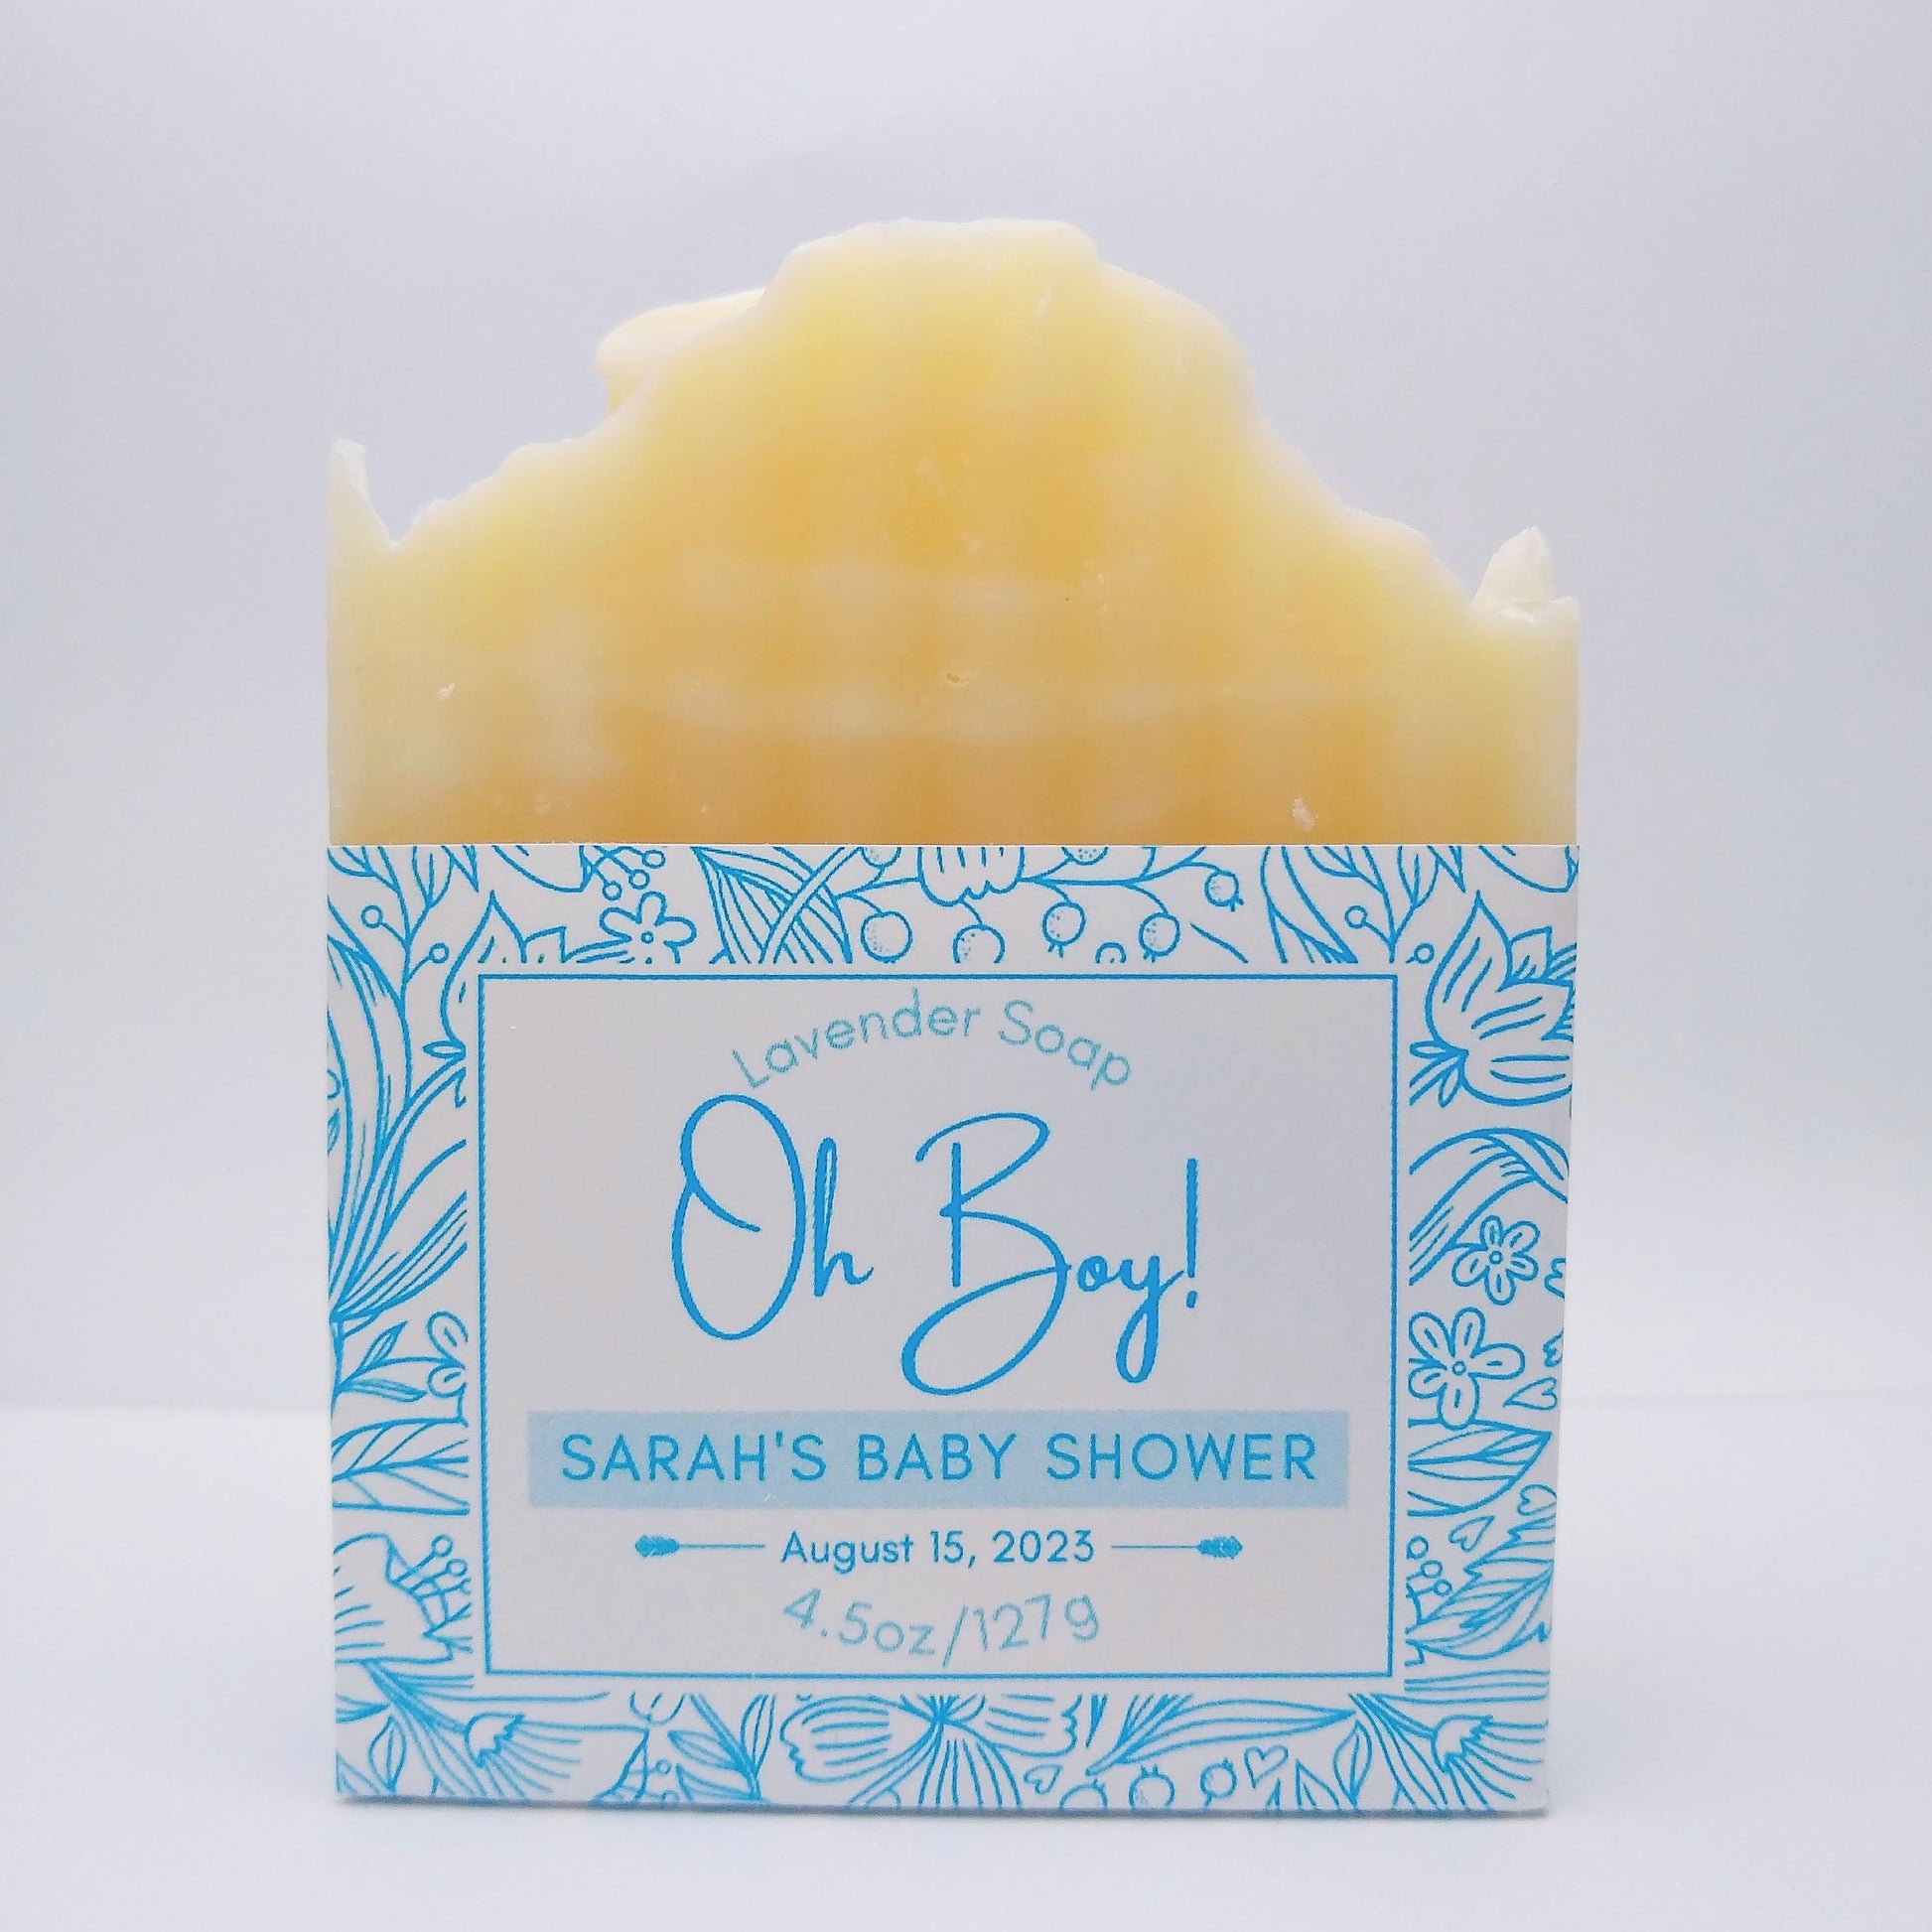 One bar of cream-colored soap with a blue label printed with "Oh Boy! Sarah's Baby Shower, August 15, 2023" and a flower-patterned accent around the border. 